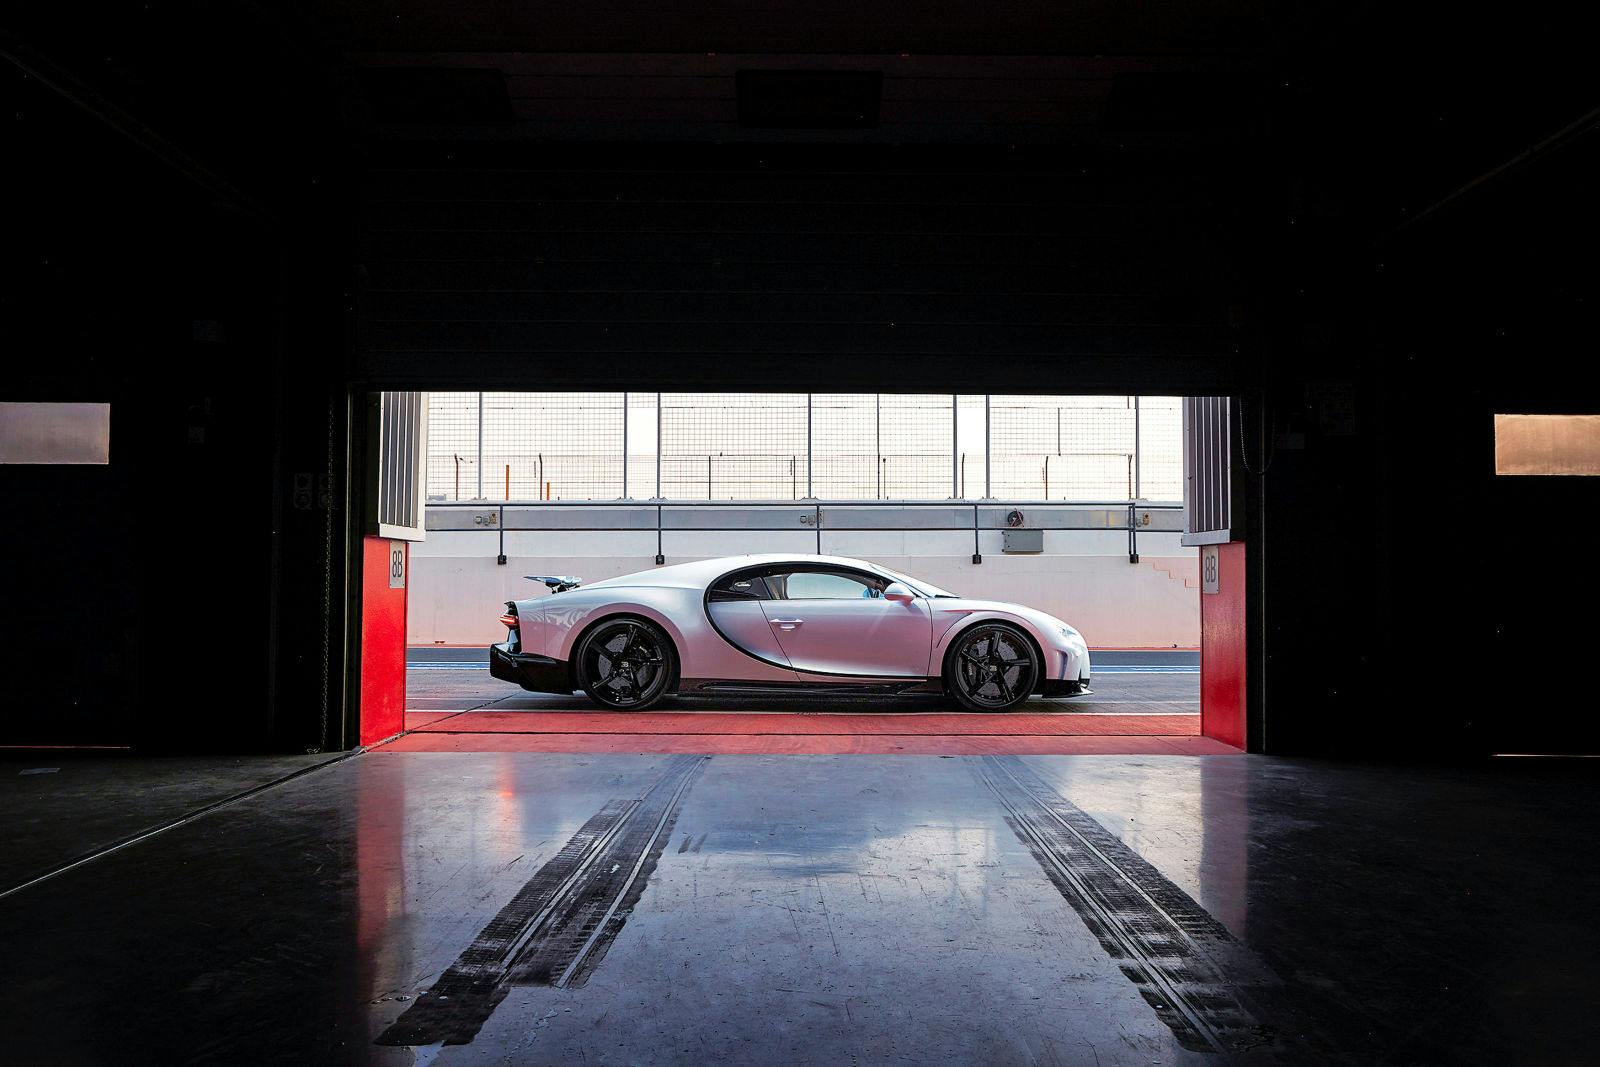 The world’s fastest and most luxurious Grand Tourisme : the Chiron Super Sport at the Autodrome Dubai